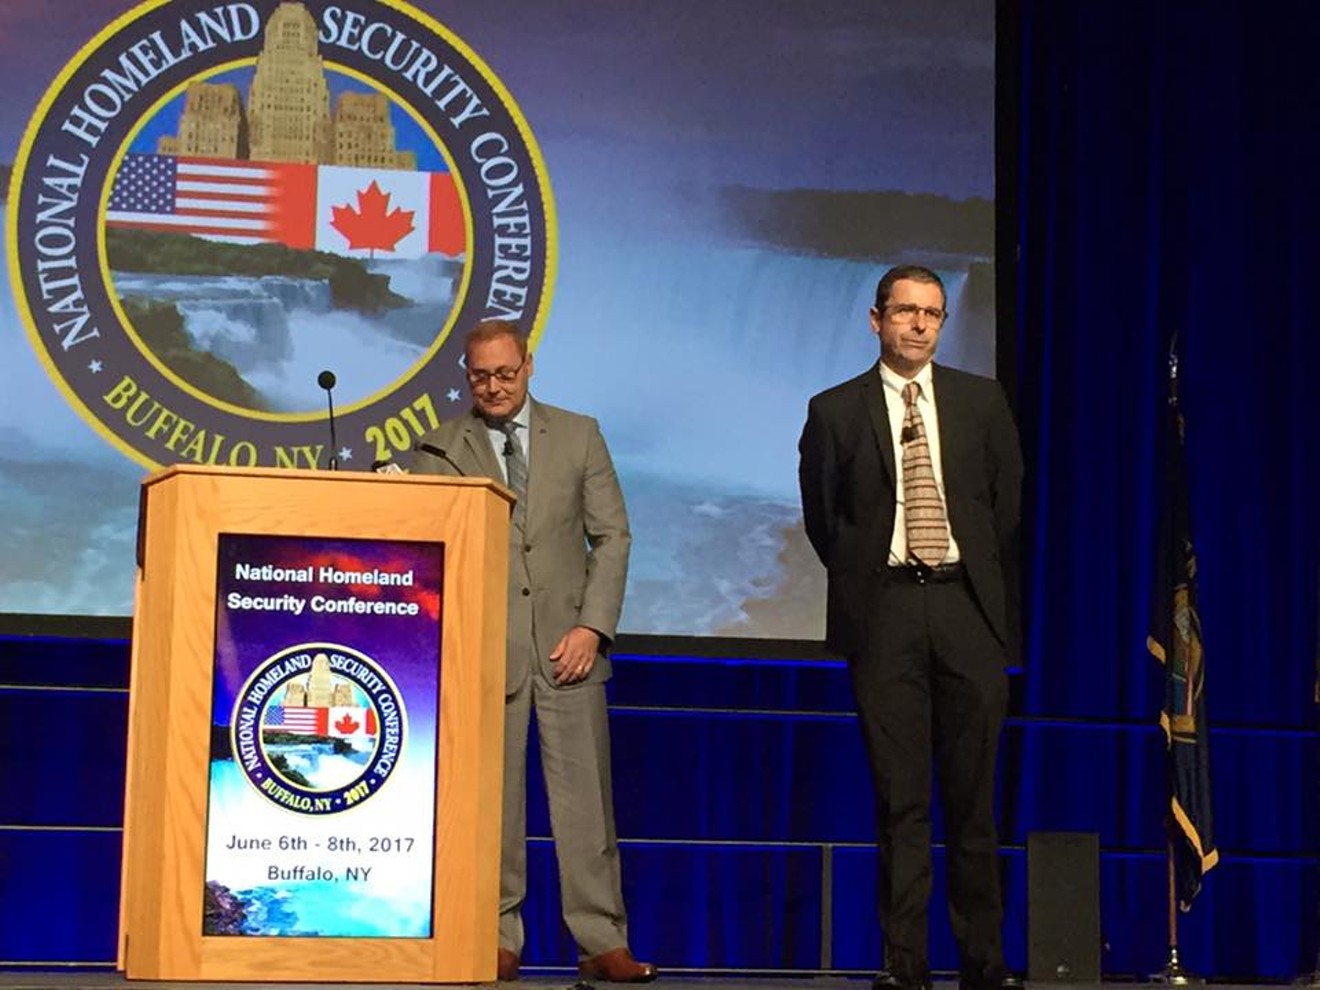 Dallas Fire and Rescue Chief David Coatney (left) and interim Dallas Police Chief David Pughes address the National Homeland Security Conference in Buffalo, New York.